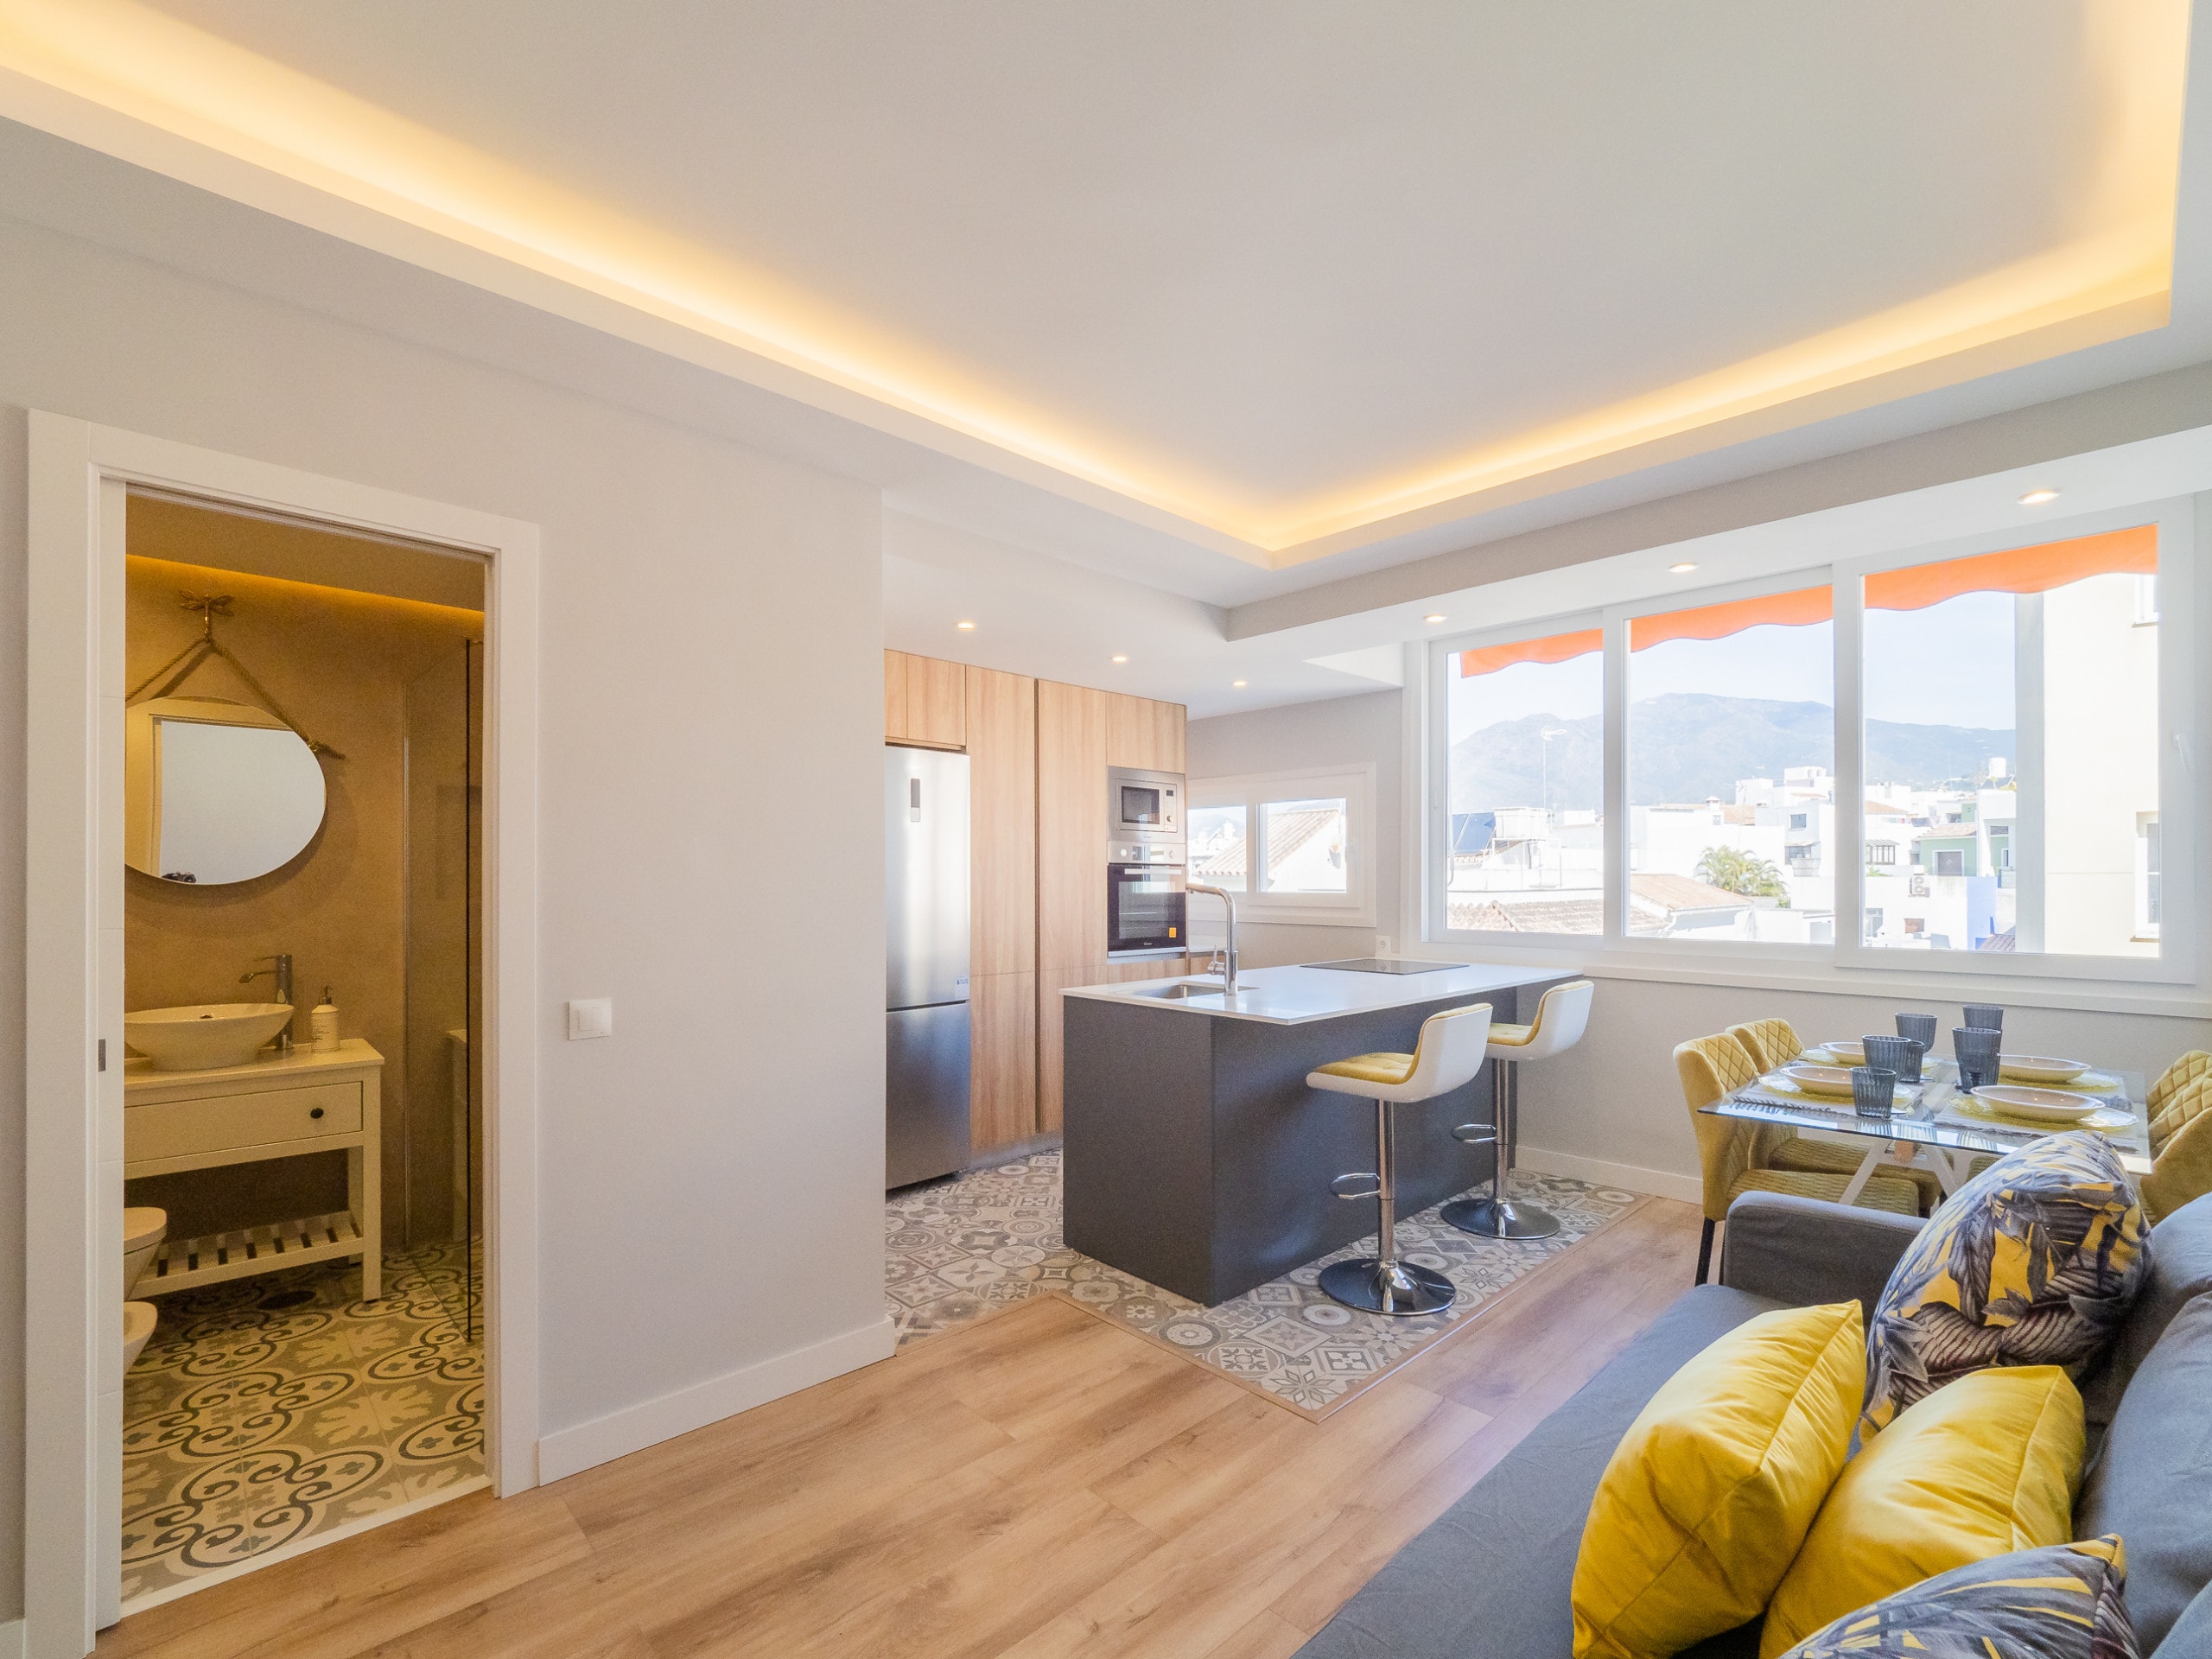 Enjoy the living room of this apartment in Estepona